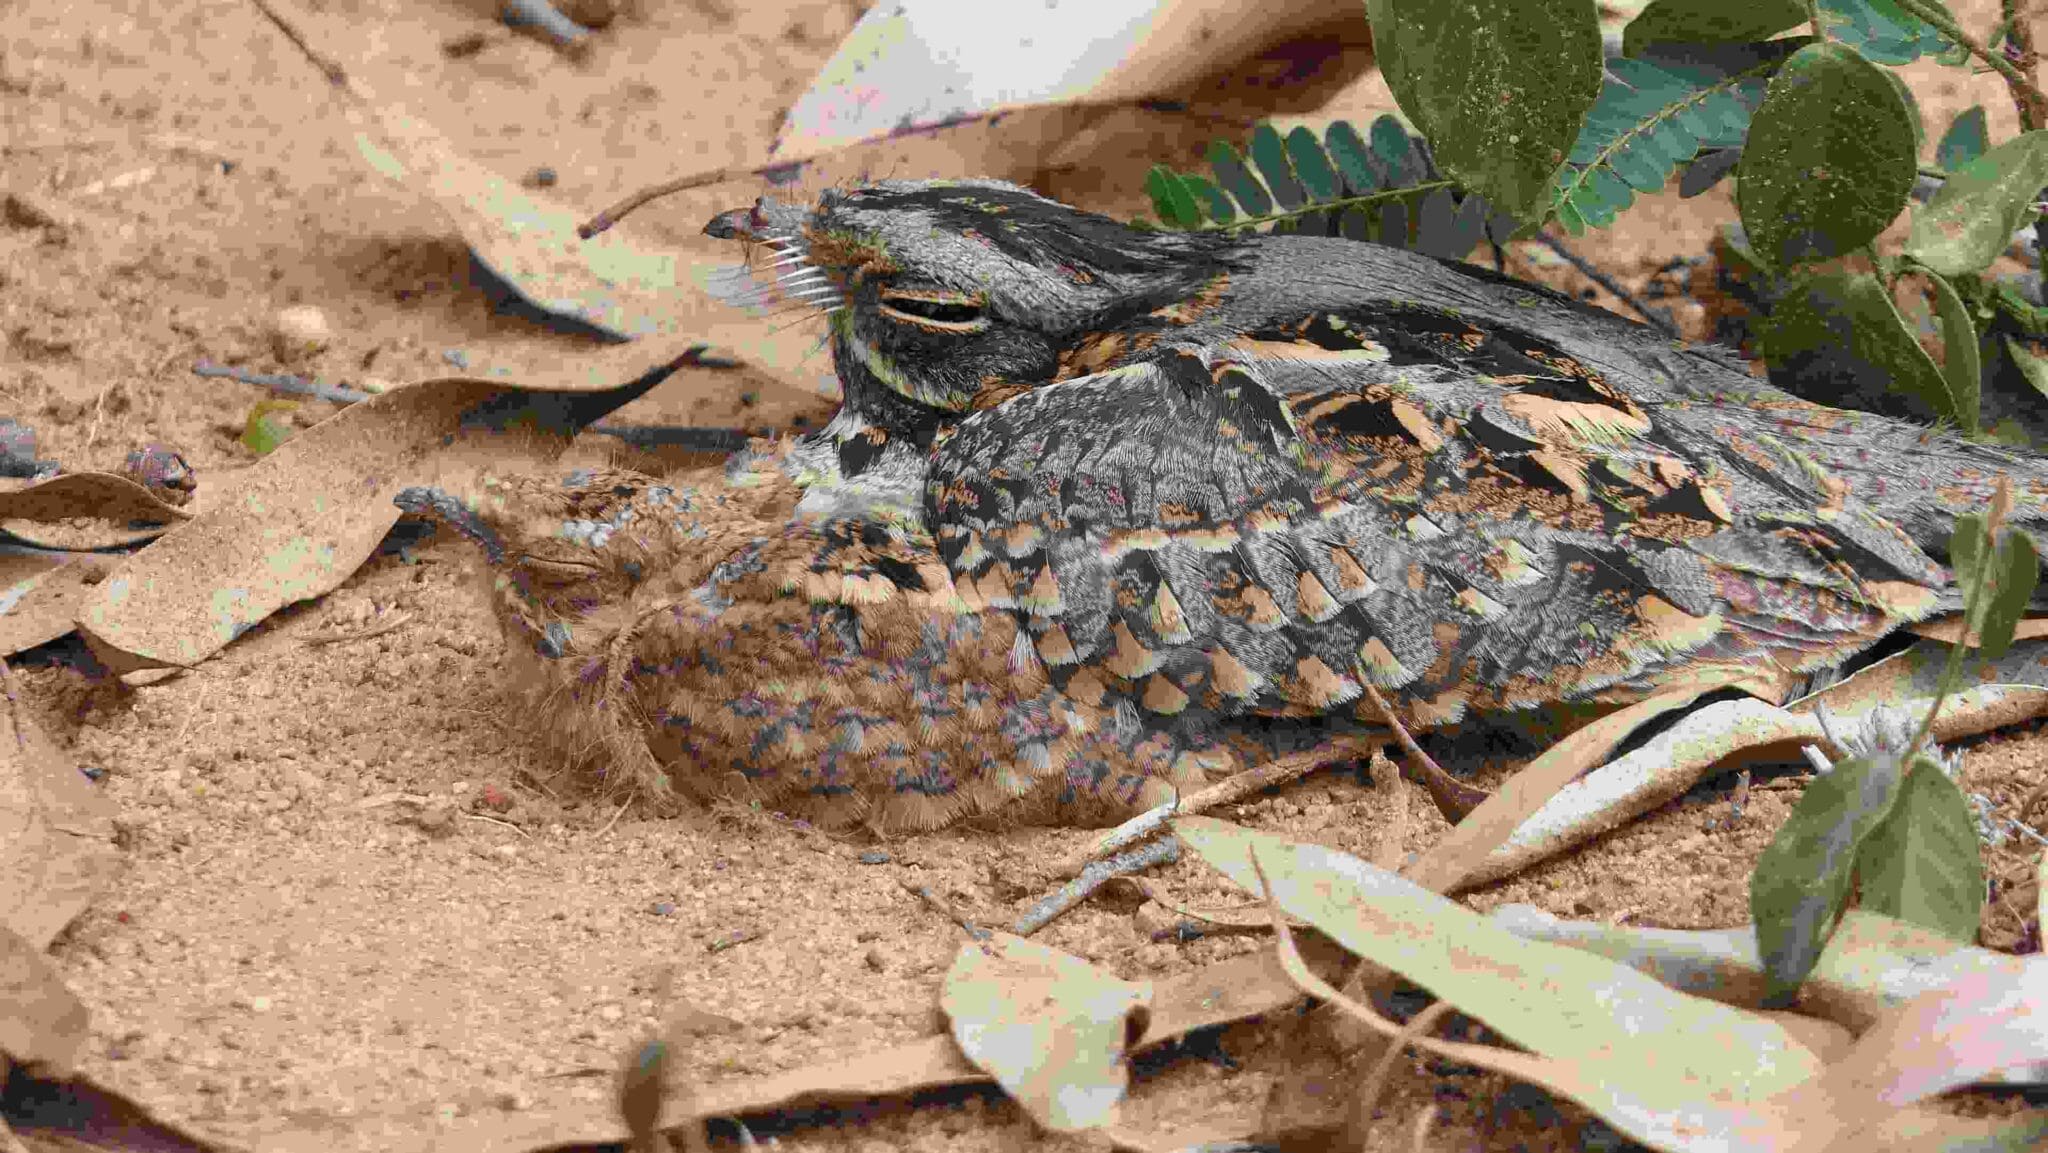 An Indian Nightjar with its fledgling is cryptically camouflaged on the forest floor in Bannerghatta, near Bangalore. Photograph: Bijoy Venugopal/ The Green Ogre